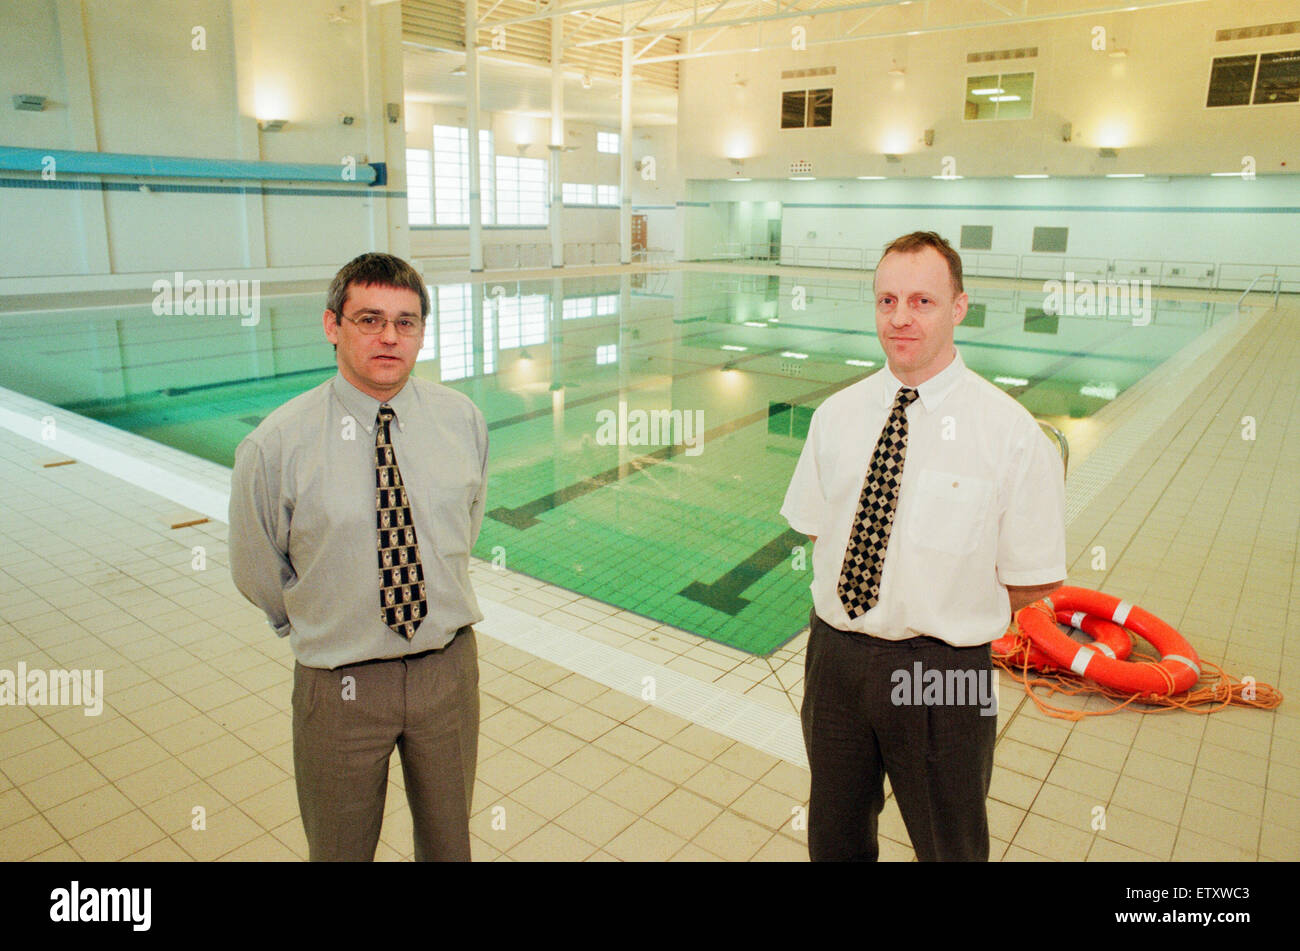 Berwick Hills new 25 metre pool at The Neptune Centre, Middlesbrough, 12th  March 1998. Pictured, Steve Chator (right) Middlesbrough Borough Council  Head of Leisure Management and Neptune Centre manager Steve Williams (left